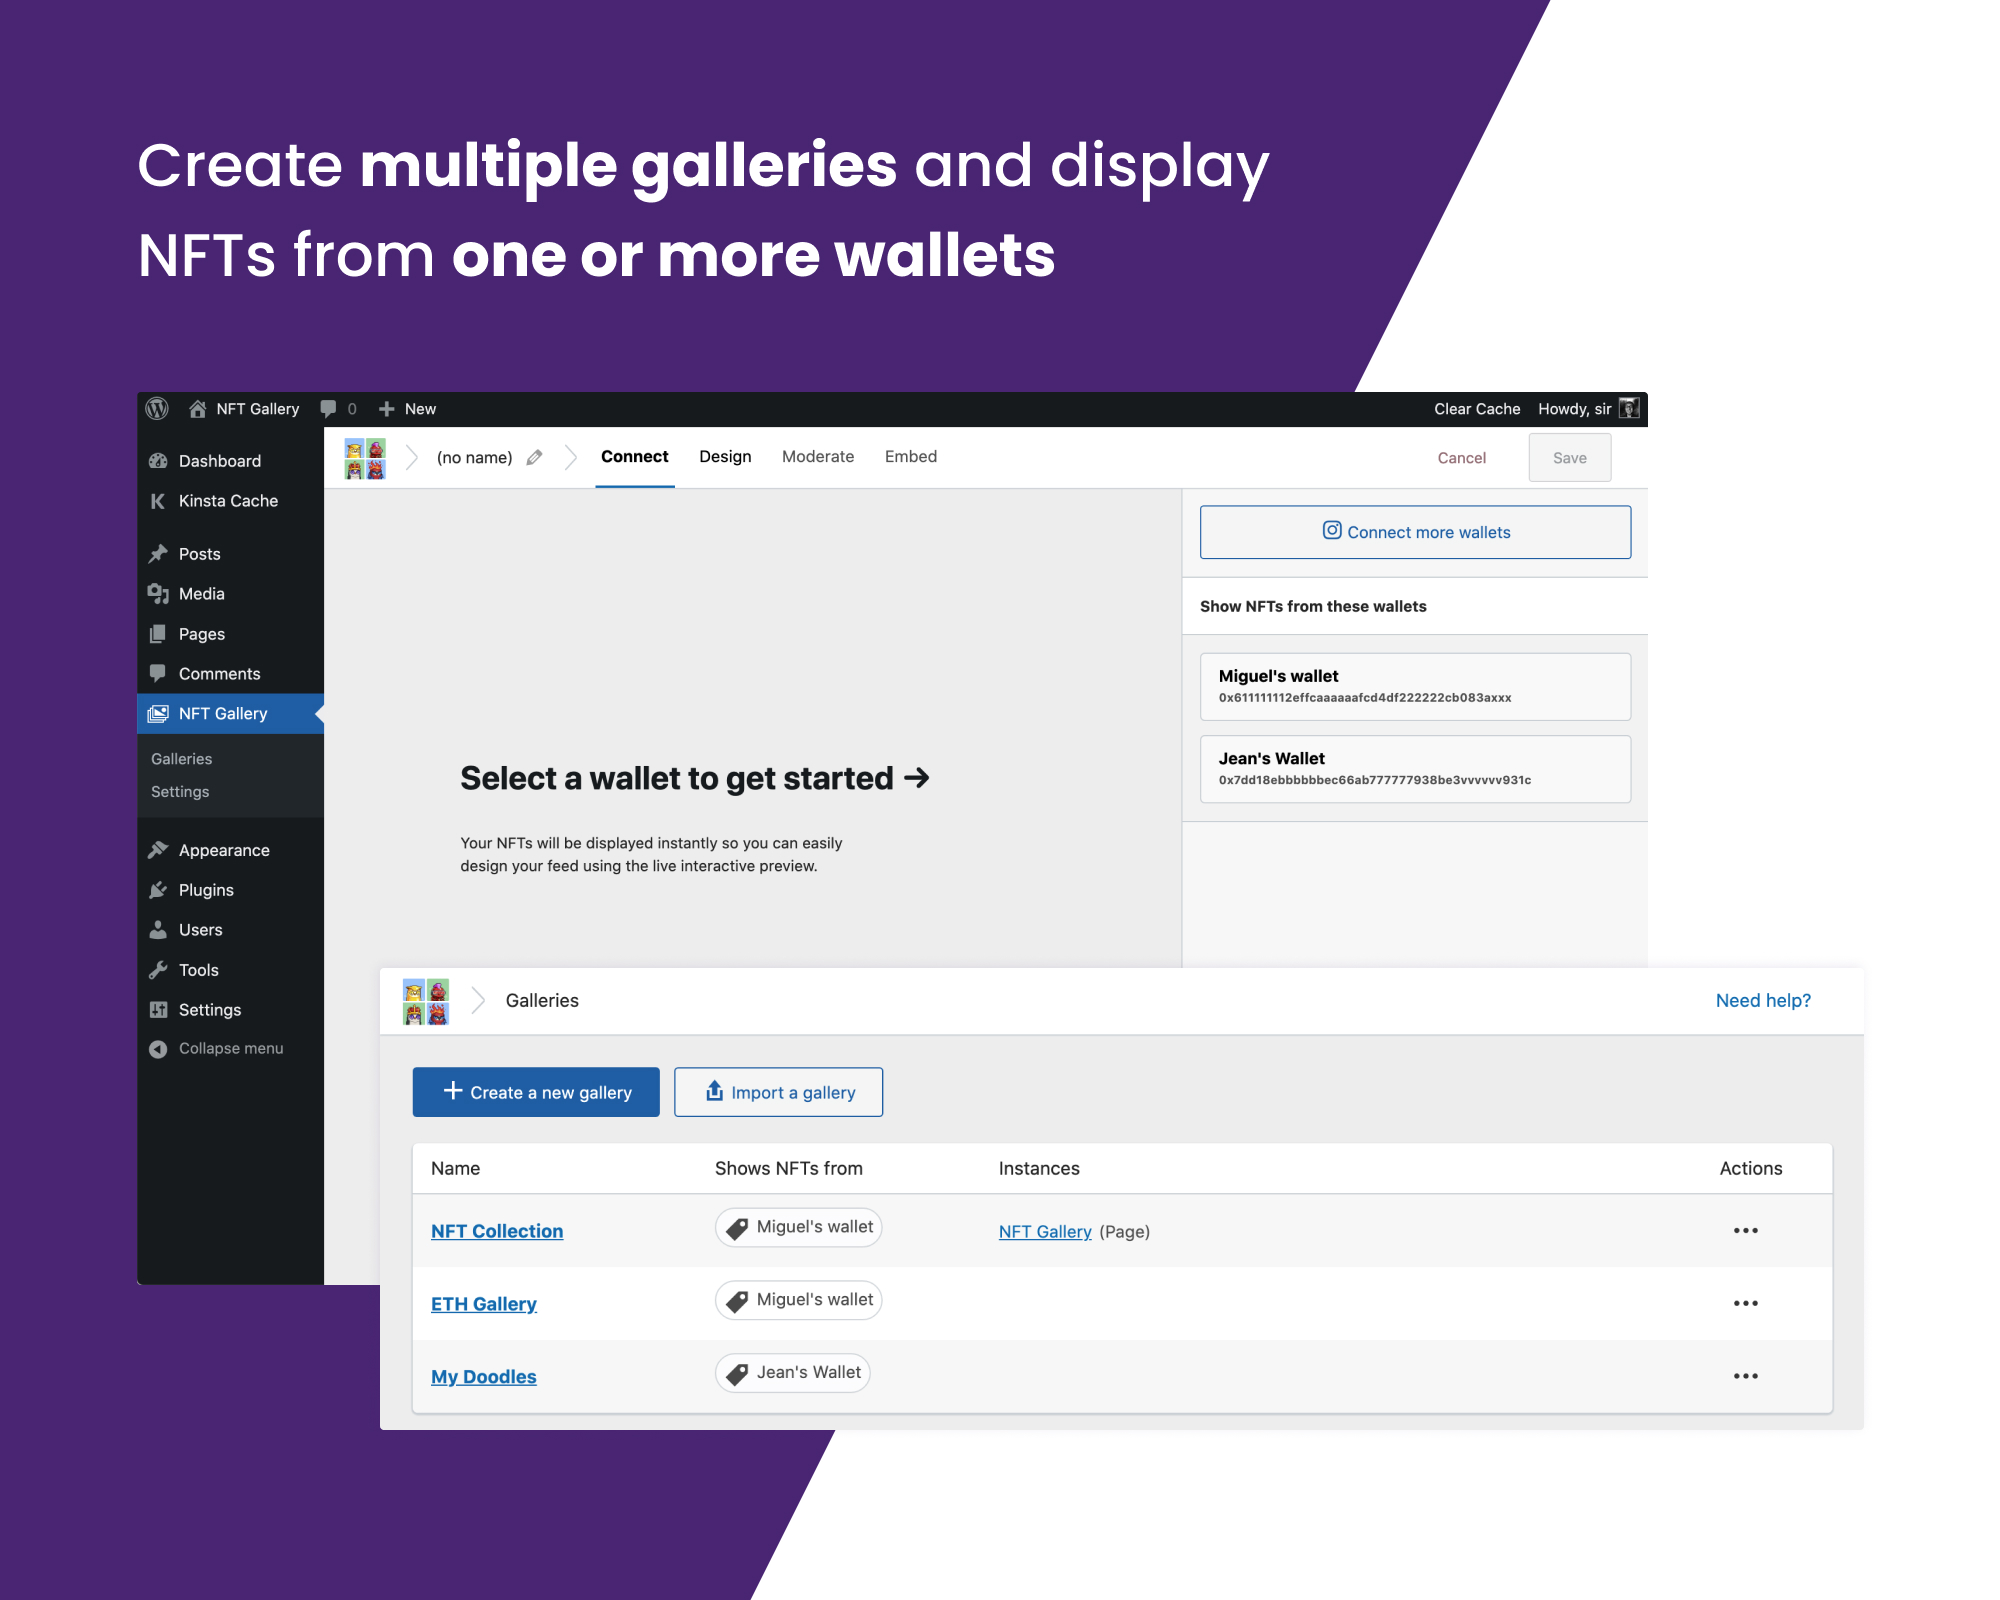 Create multiple galleries and display NFTs from one or more wallets.